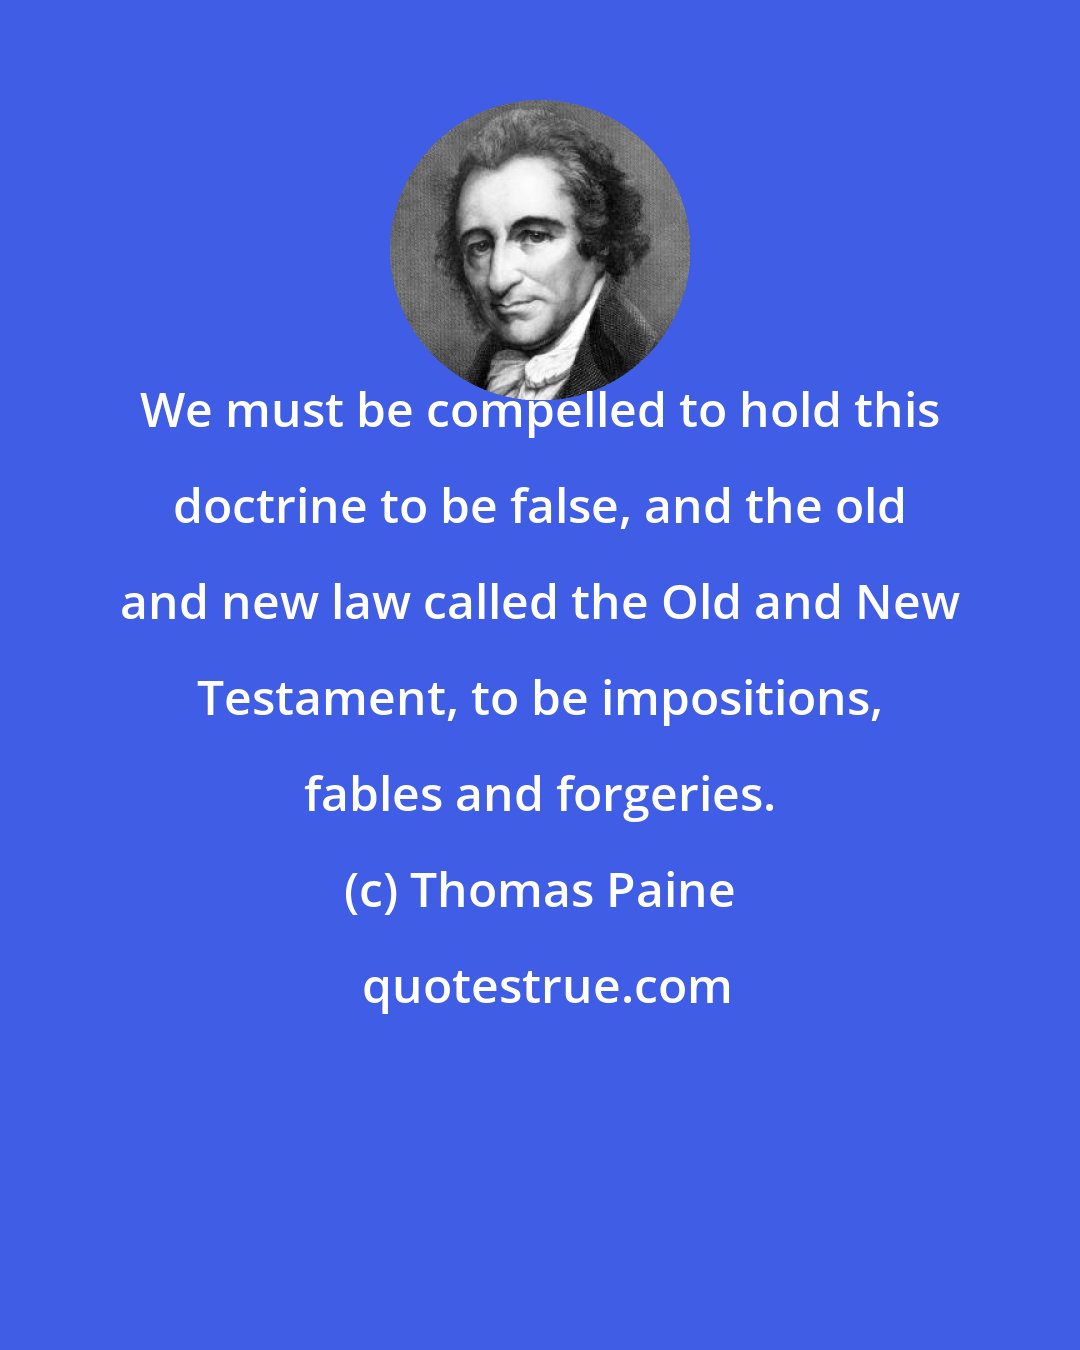 Thomas Paine: We must be compelled to hold this doctrine to be false, and the old and new law called the Old and New Testament, to be impositions, fables and forgeries.